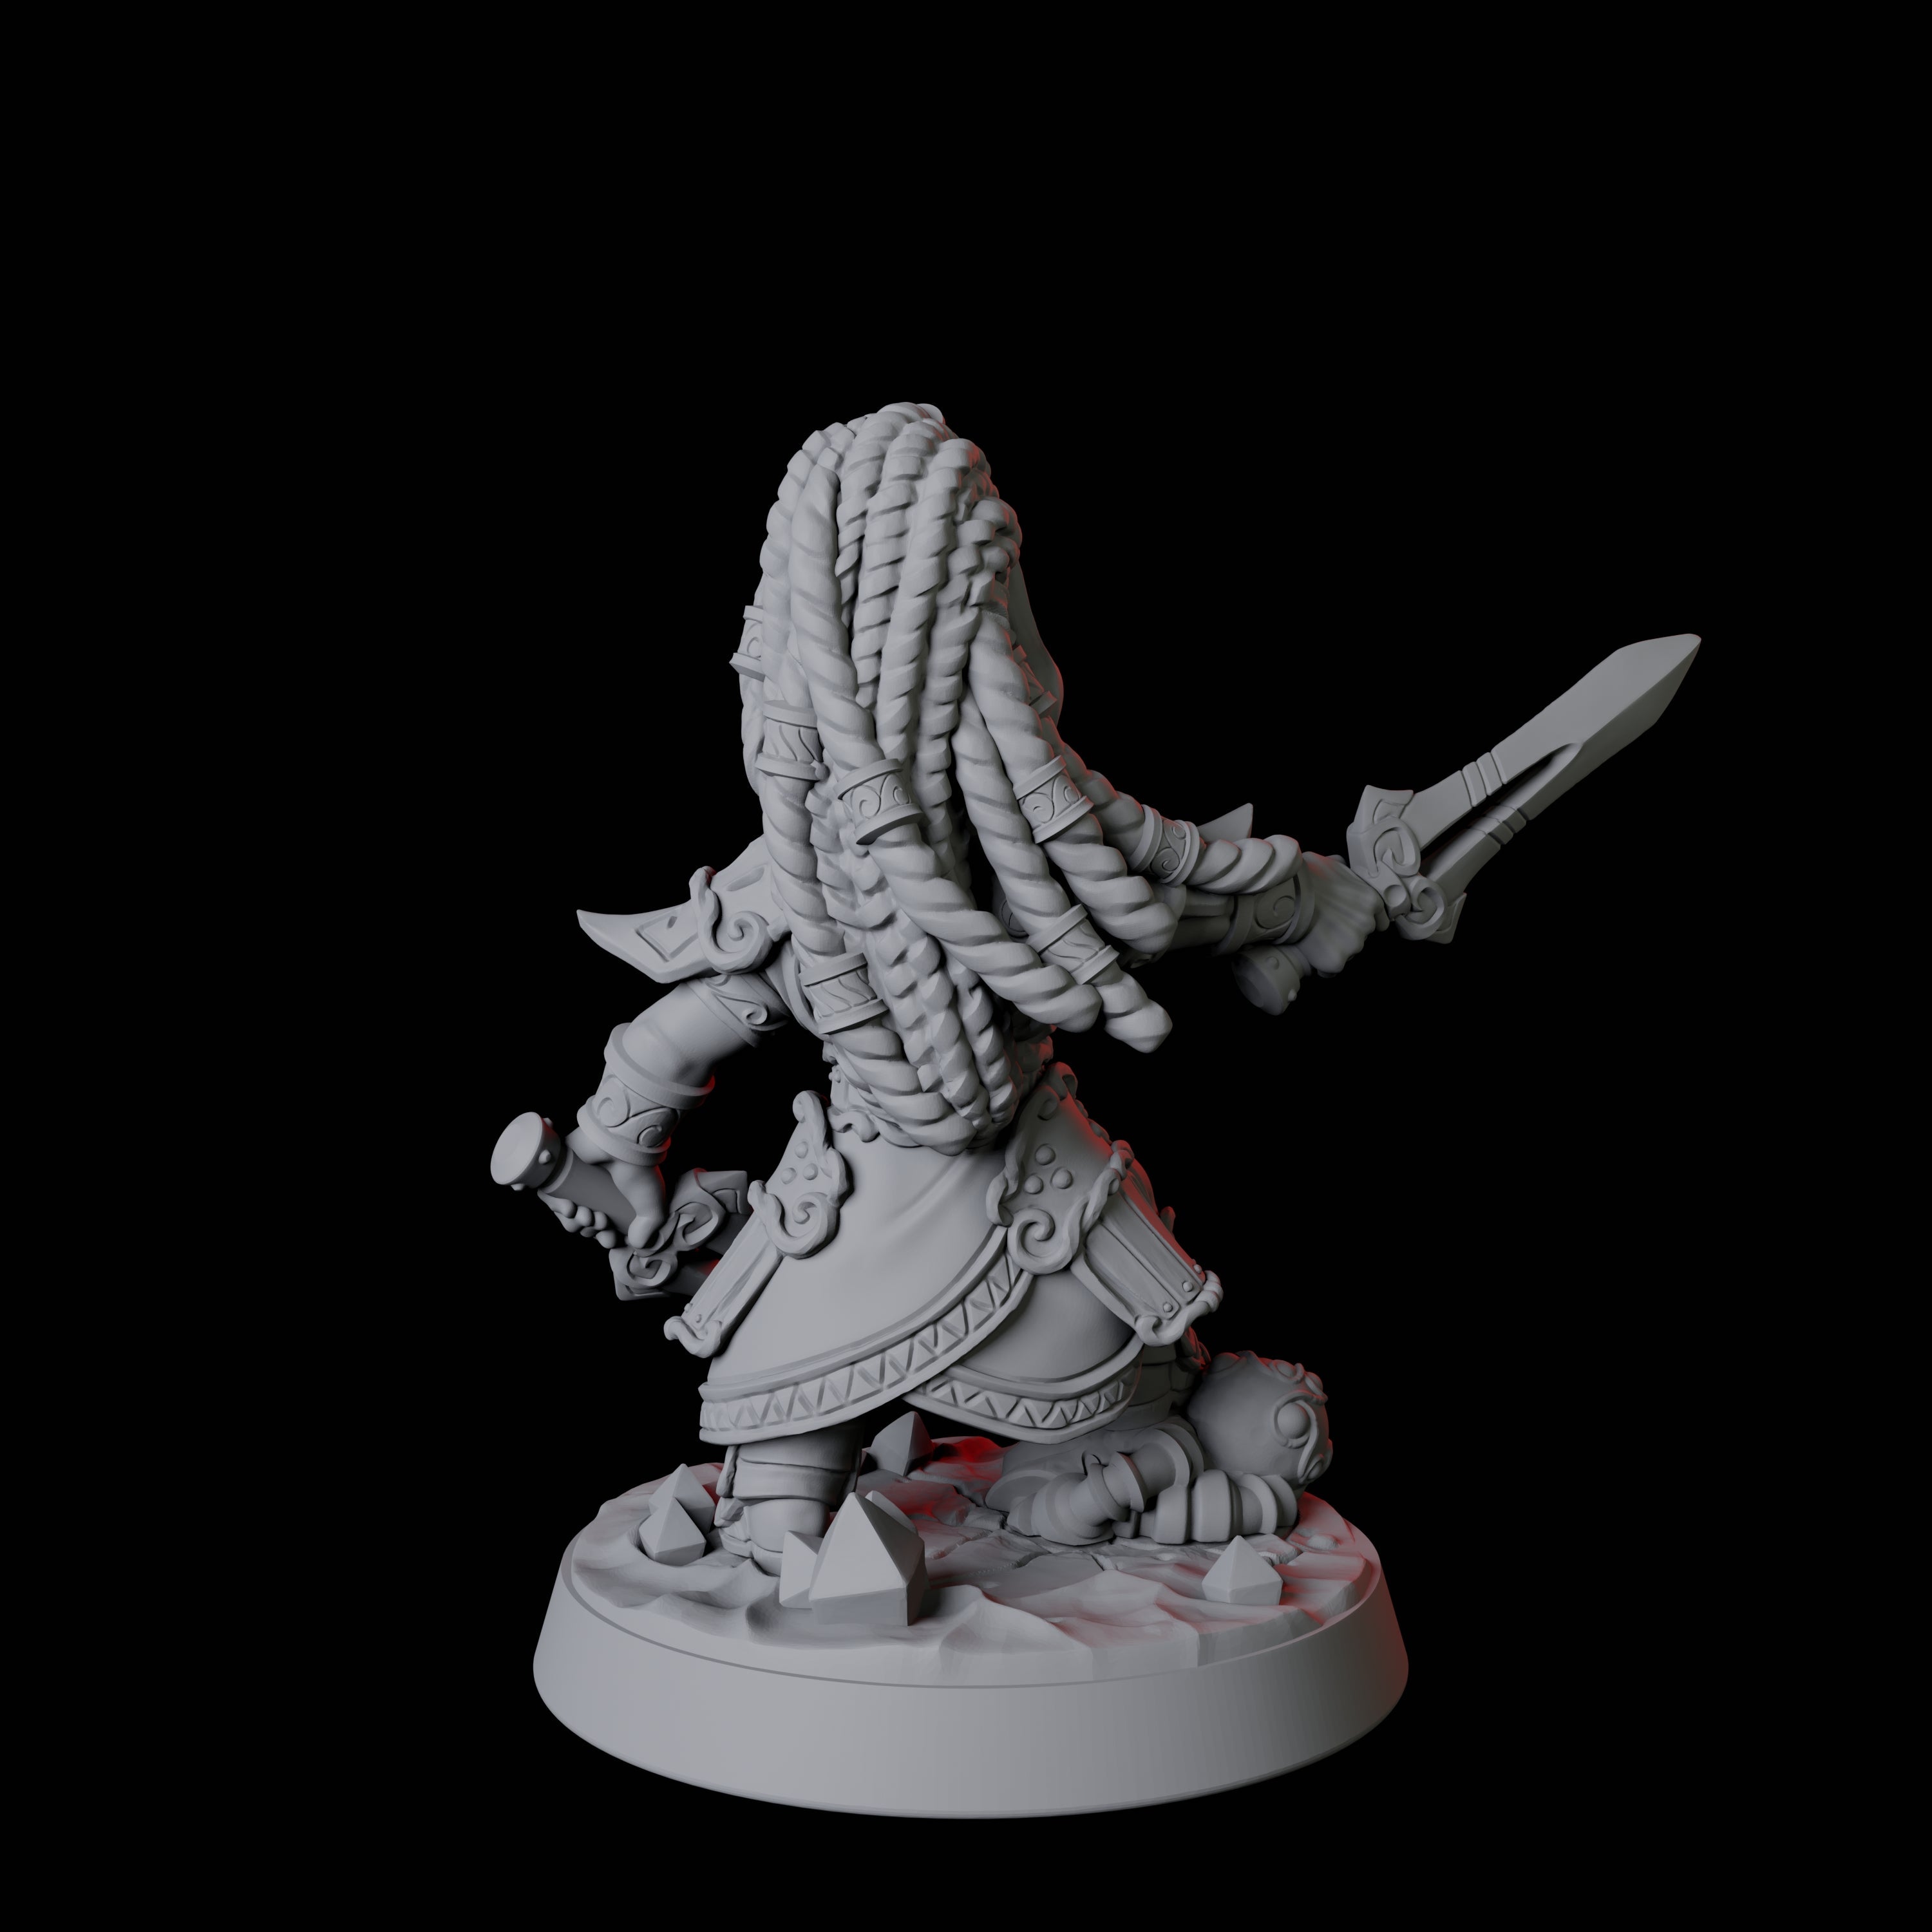 Gnome Queen Miniature for Dungeons and Dragons, Pathfinder or other TTRPGs